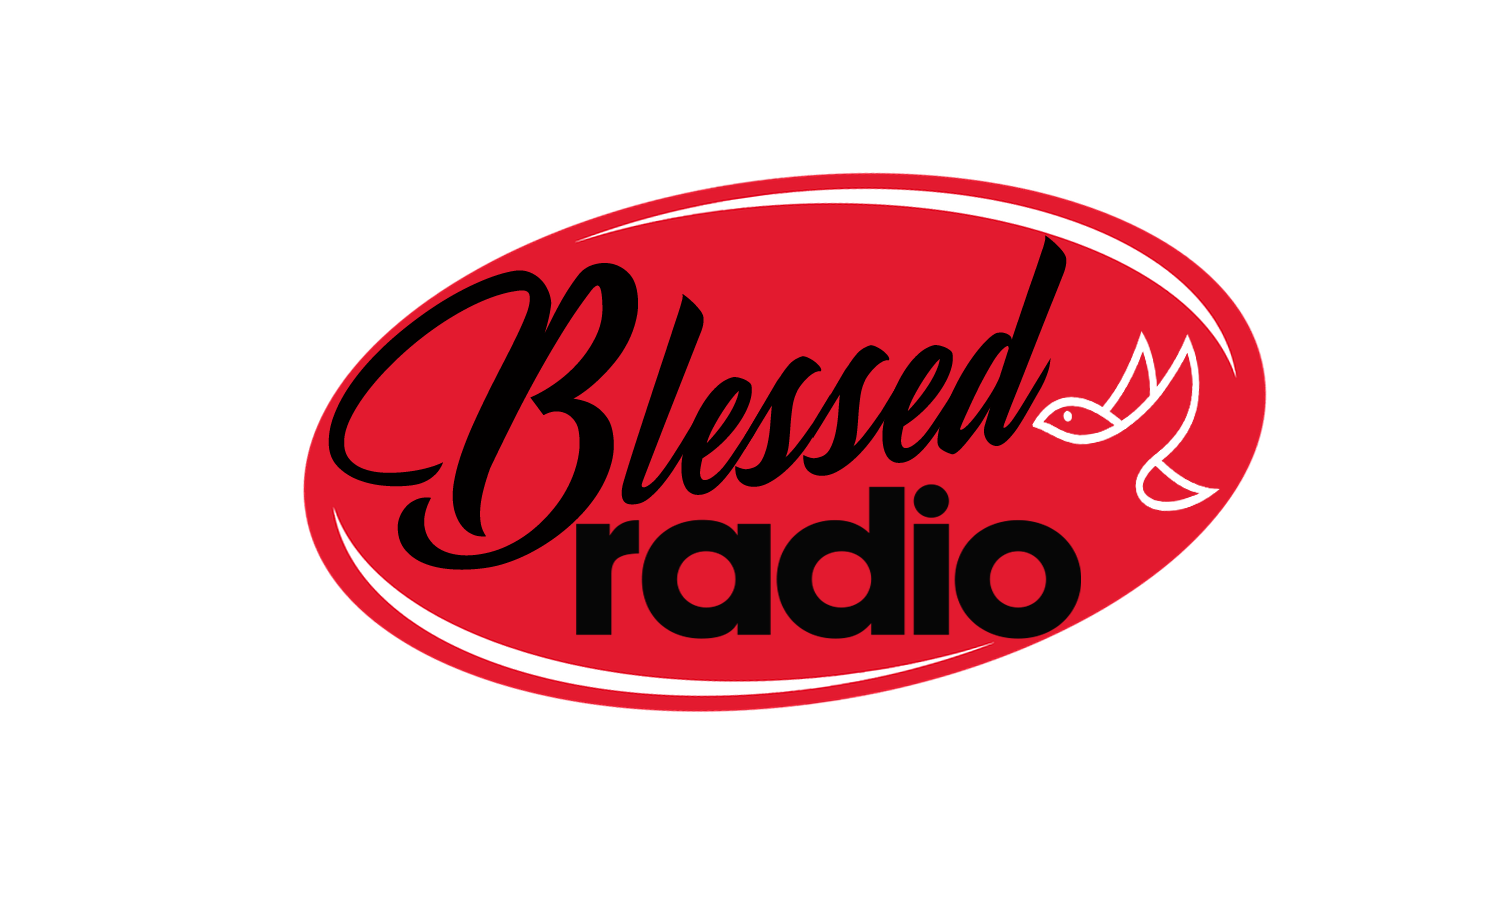 Art for blessed radio jingle 1 by Blessed Radio Jingle faith